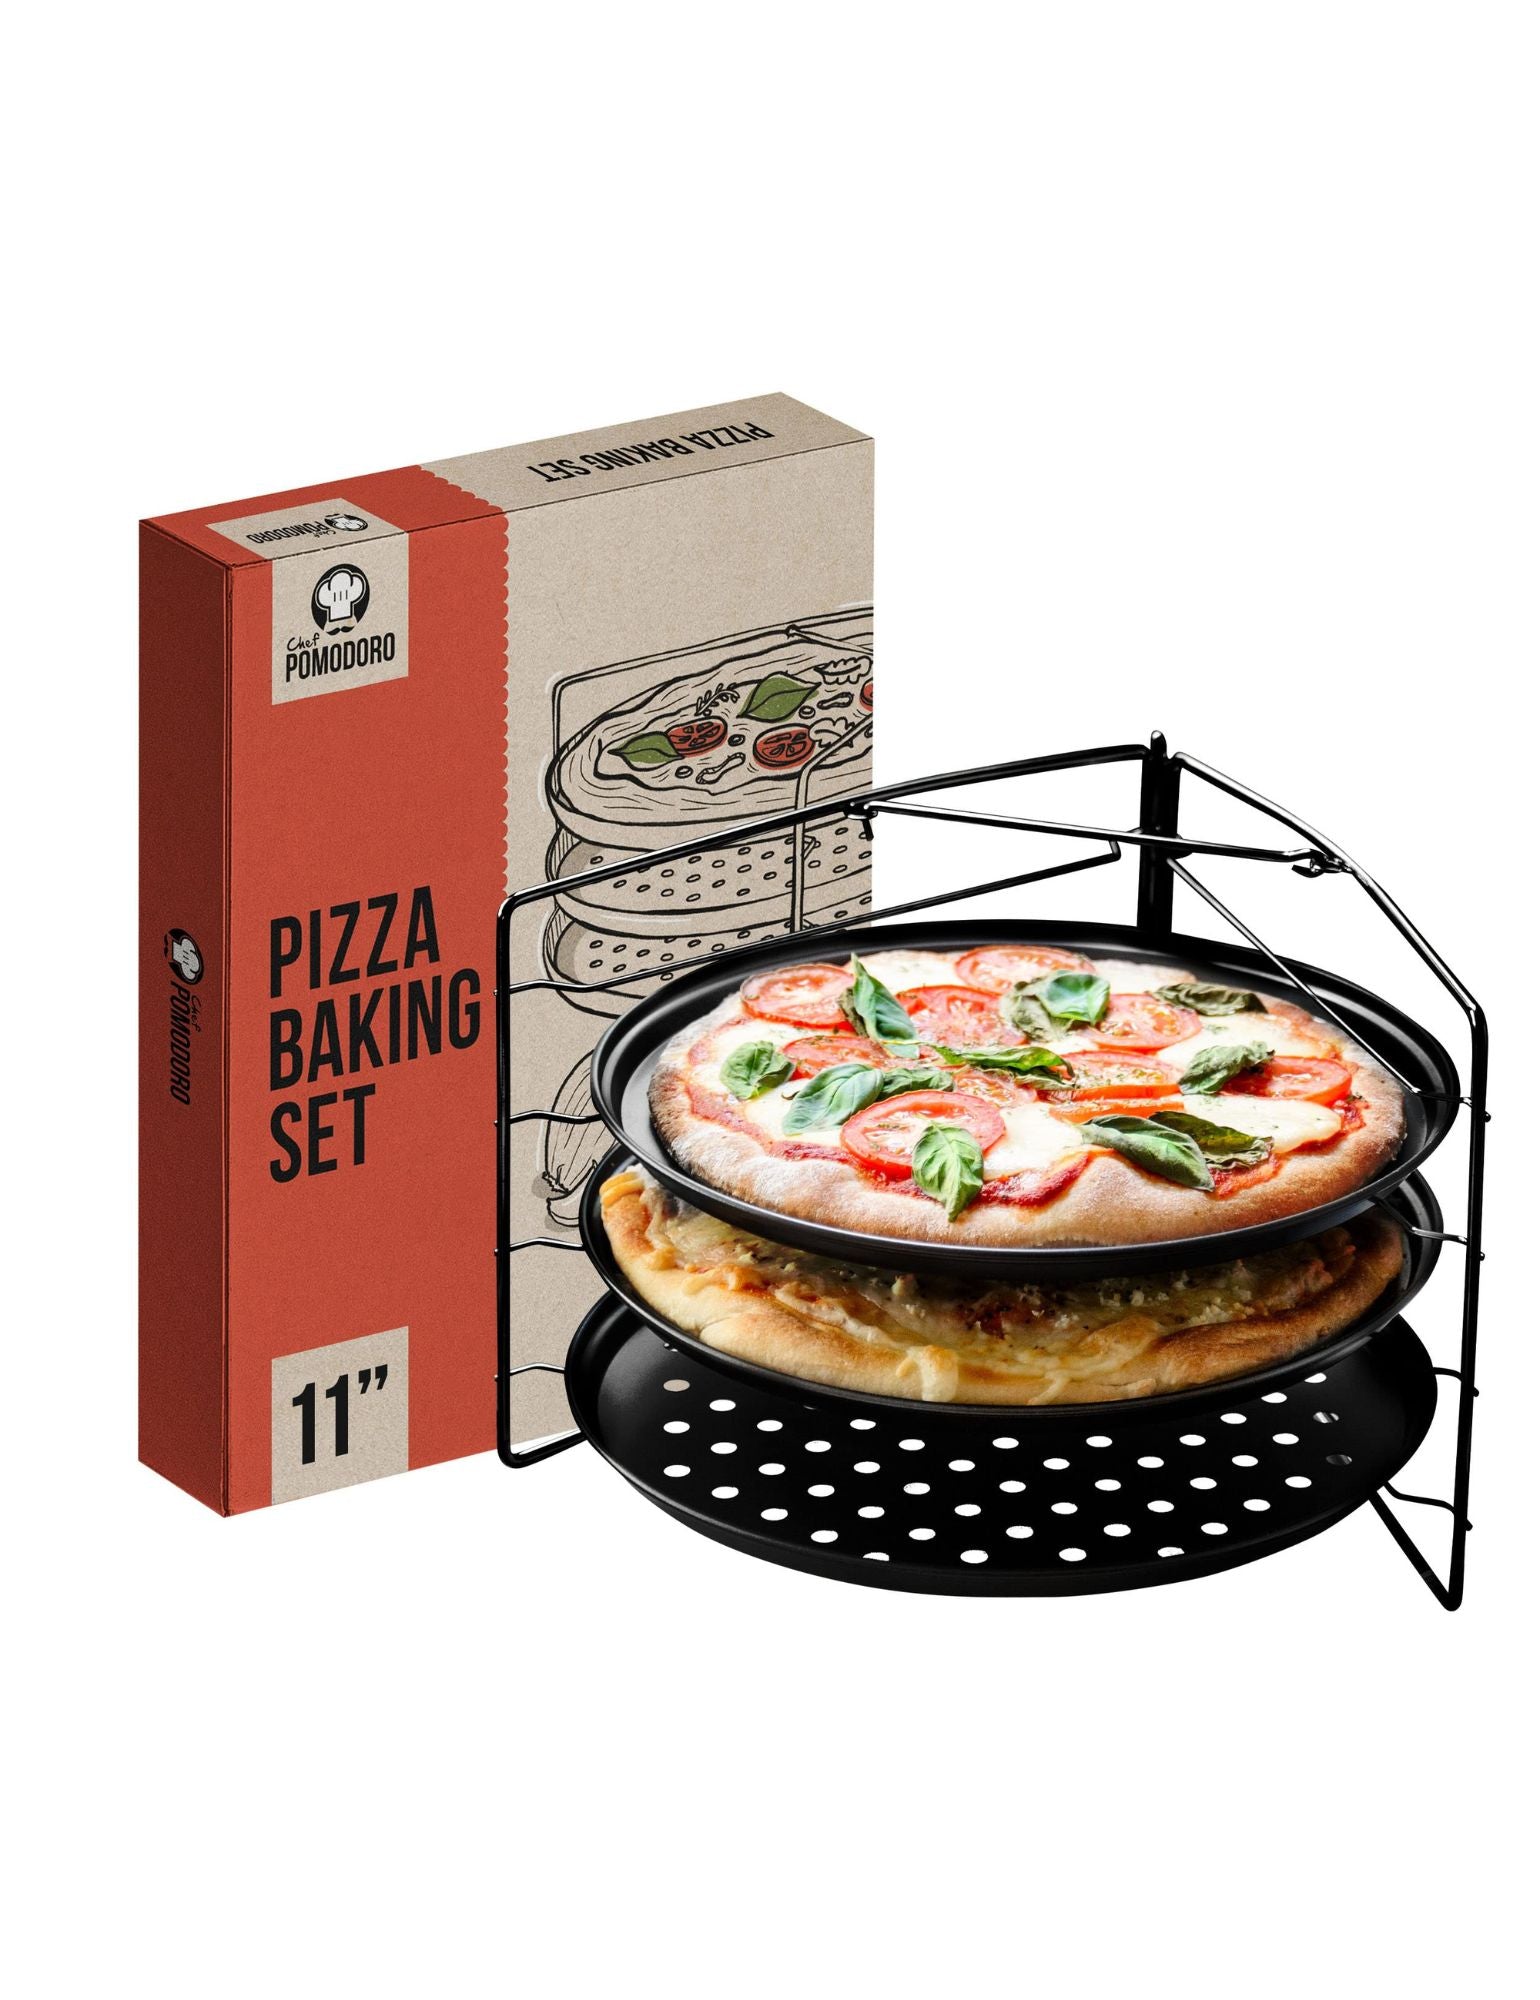 Save on Bakeware  Save on Pie Pan, Pizza Pan, or 12 Inch Skillet